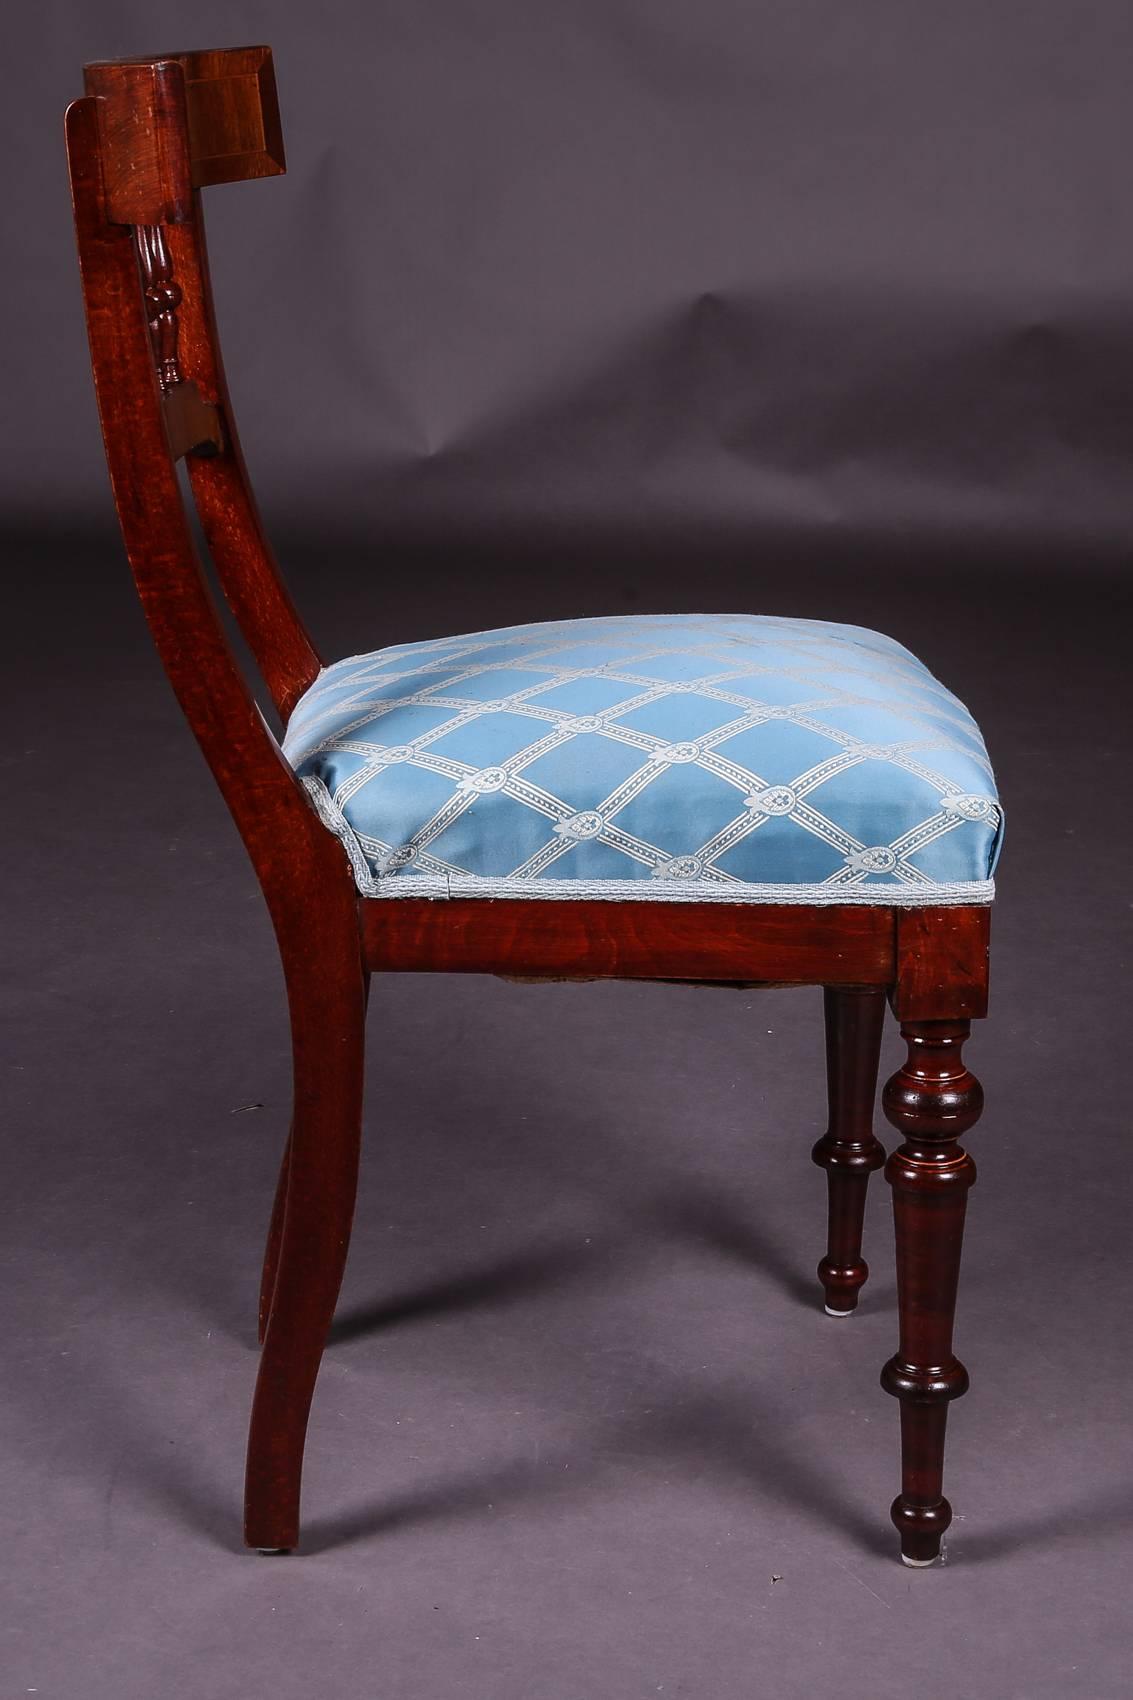 Mahogany body with wide backrest. Centrally four turned columns. Upholstered with blue fabric pattern.

(C-122).